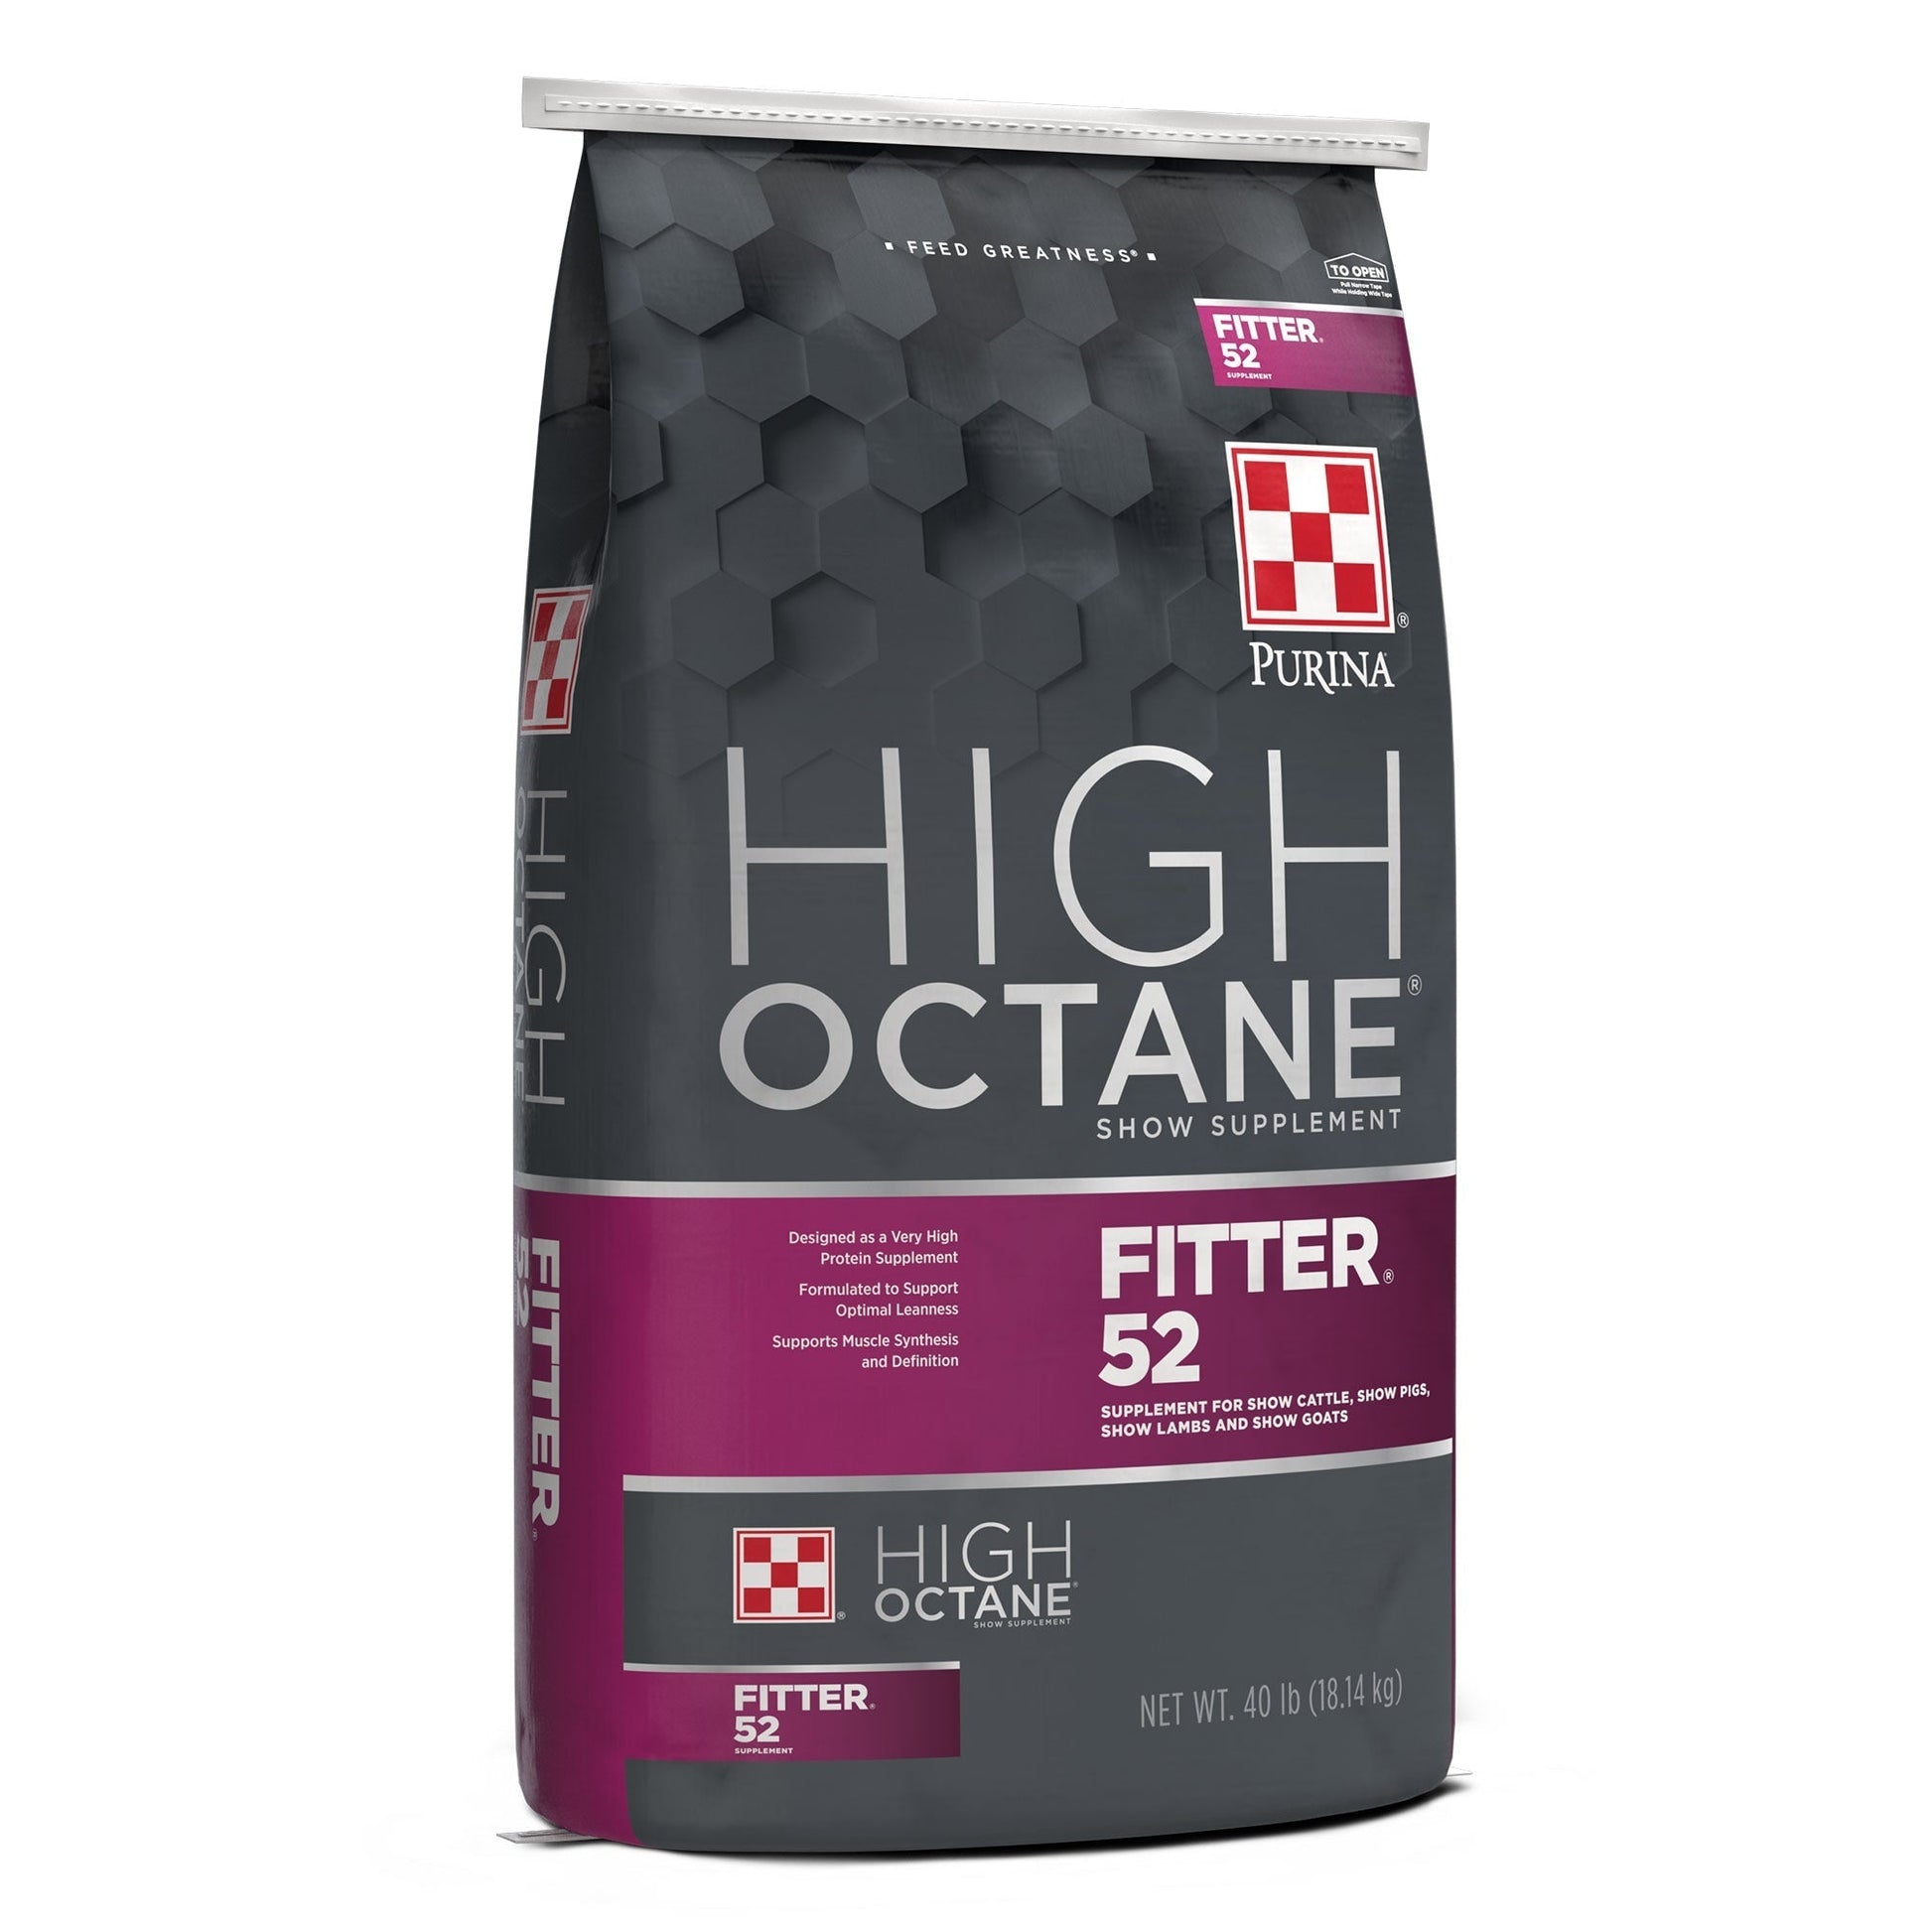 Left angle of Purina® High Octane® Fitter 52™ Show Supplement